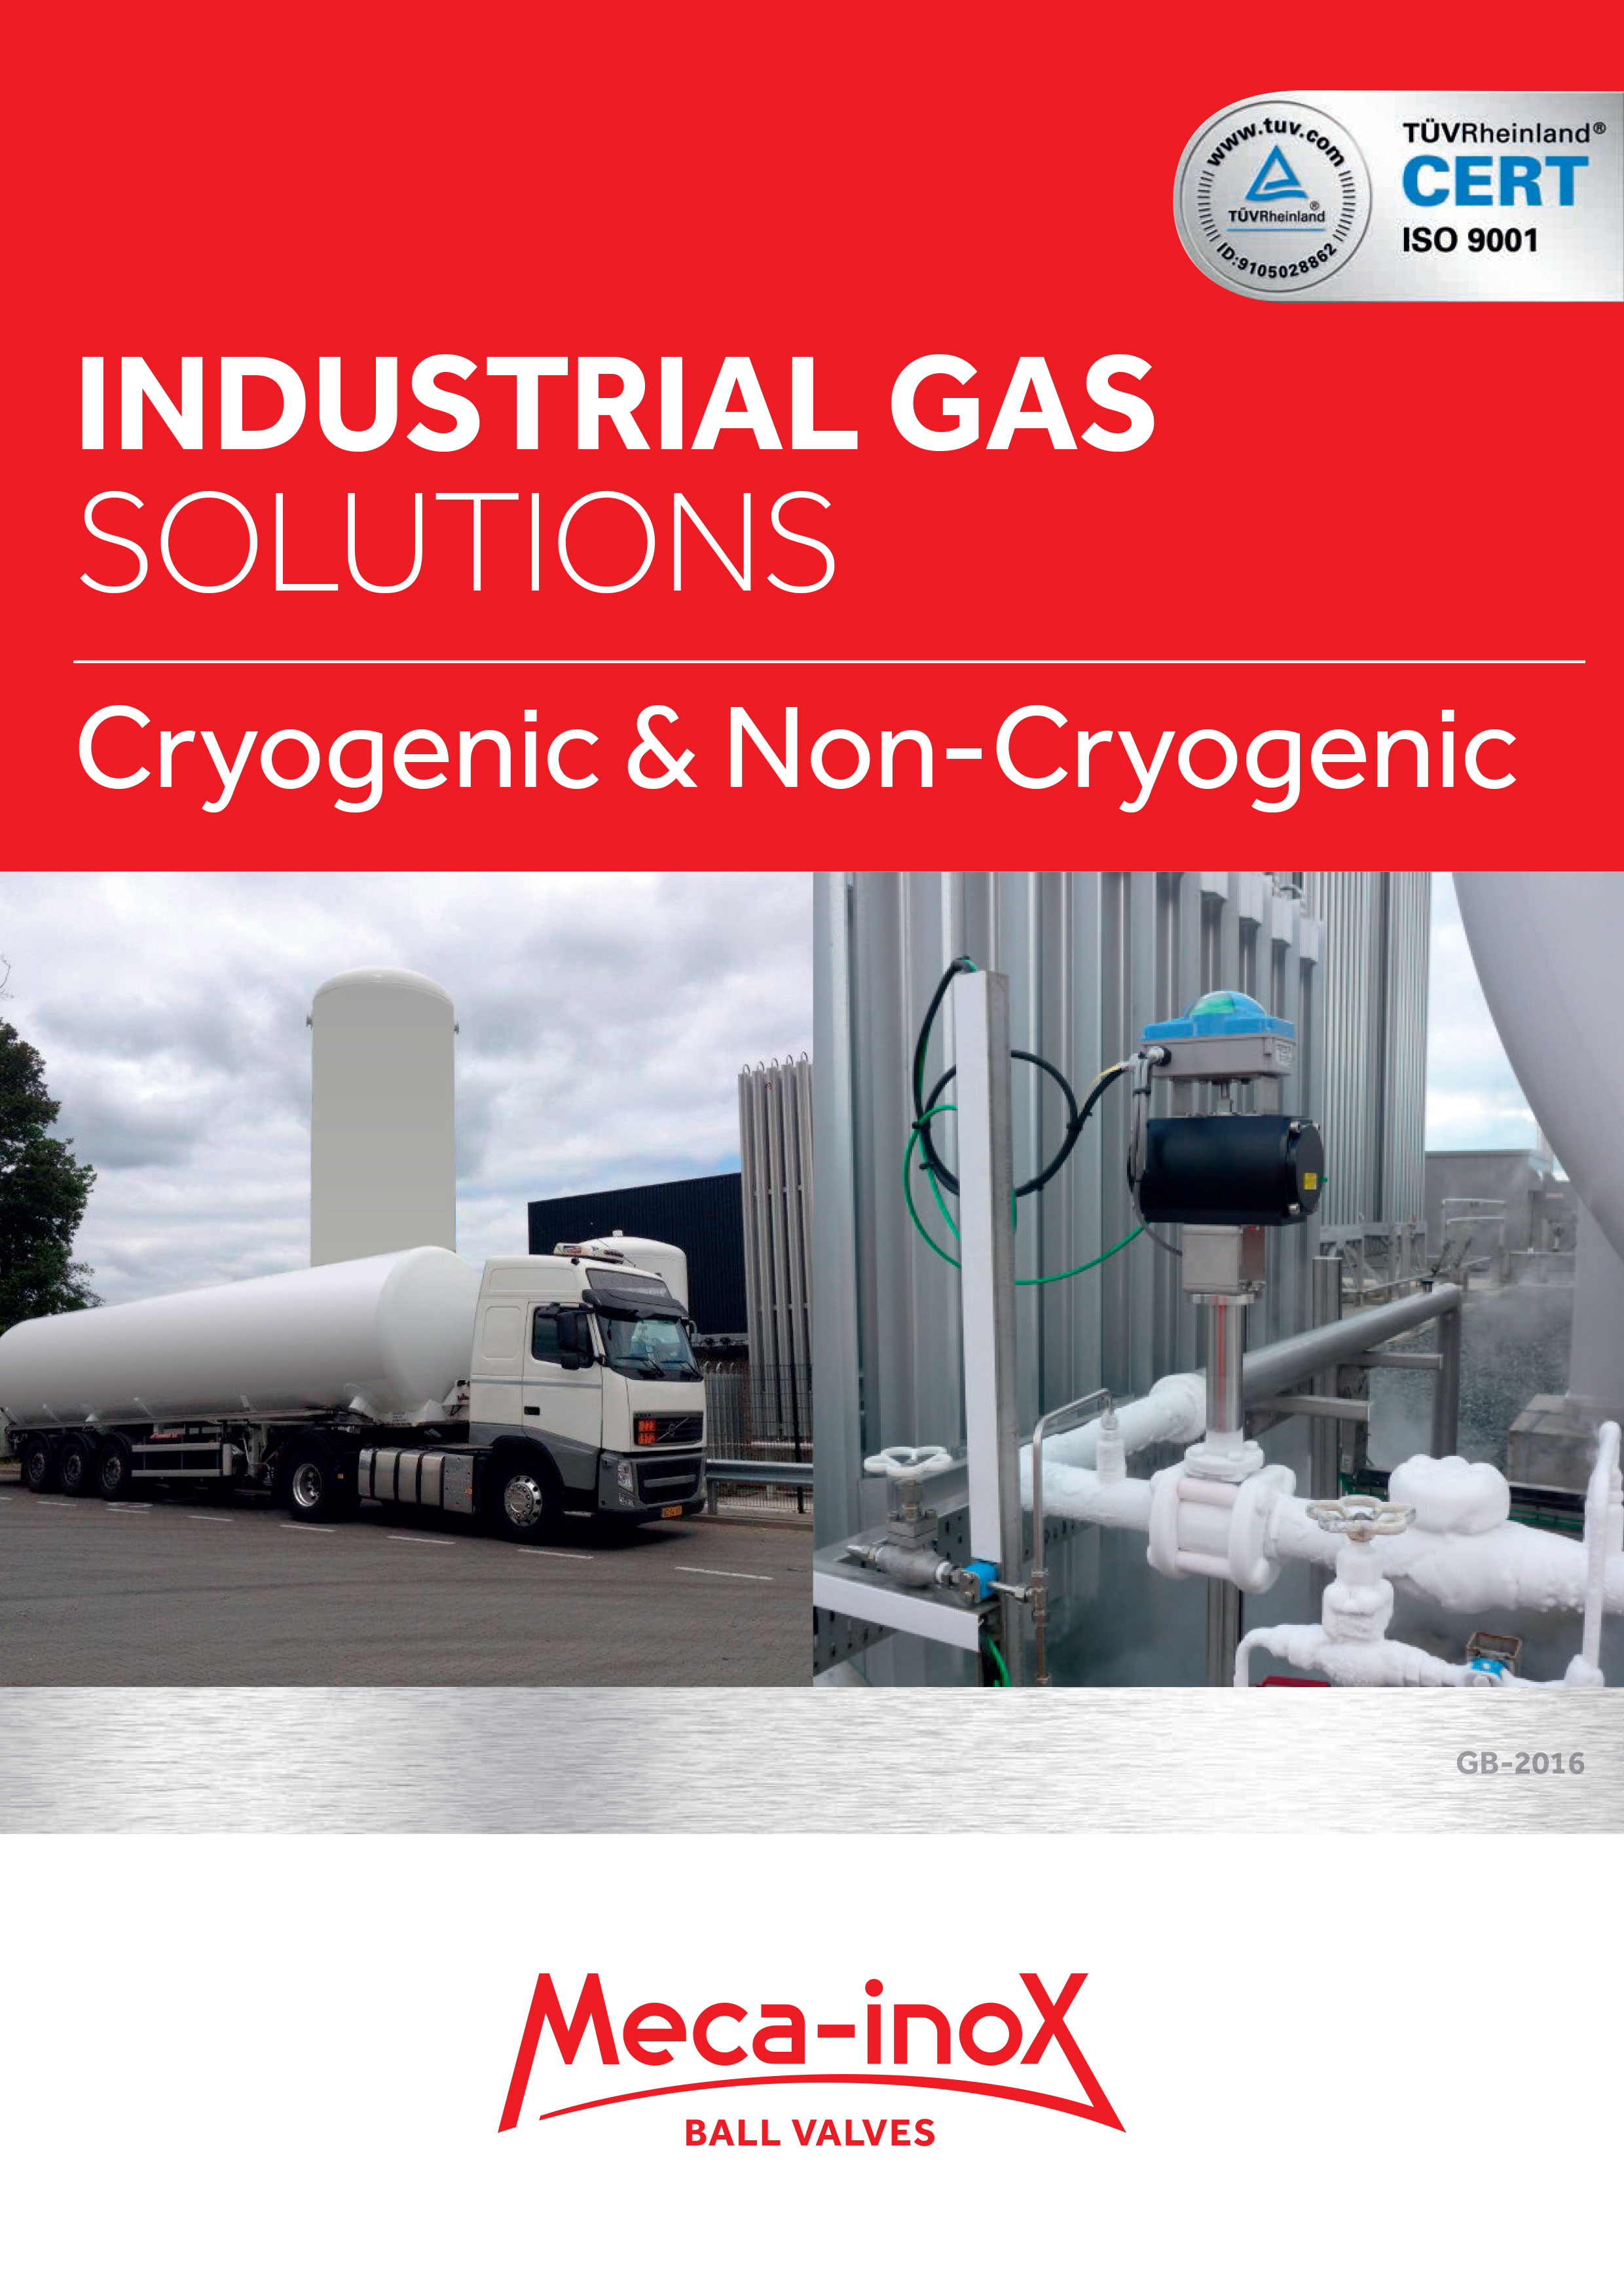 Meca-Inox Company Brochures - To understand the what Meca-Inox can offer for the Industrial gas solutions (Cryogenics & Non-Cryogenics), please read the brochures here. 